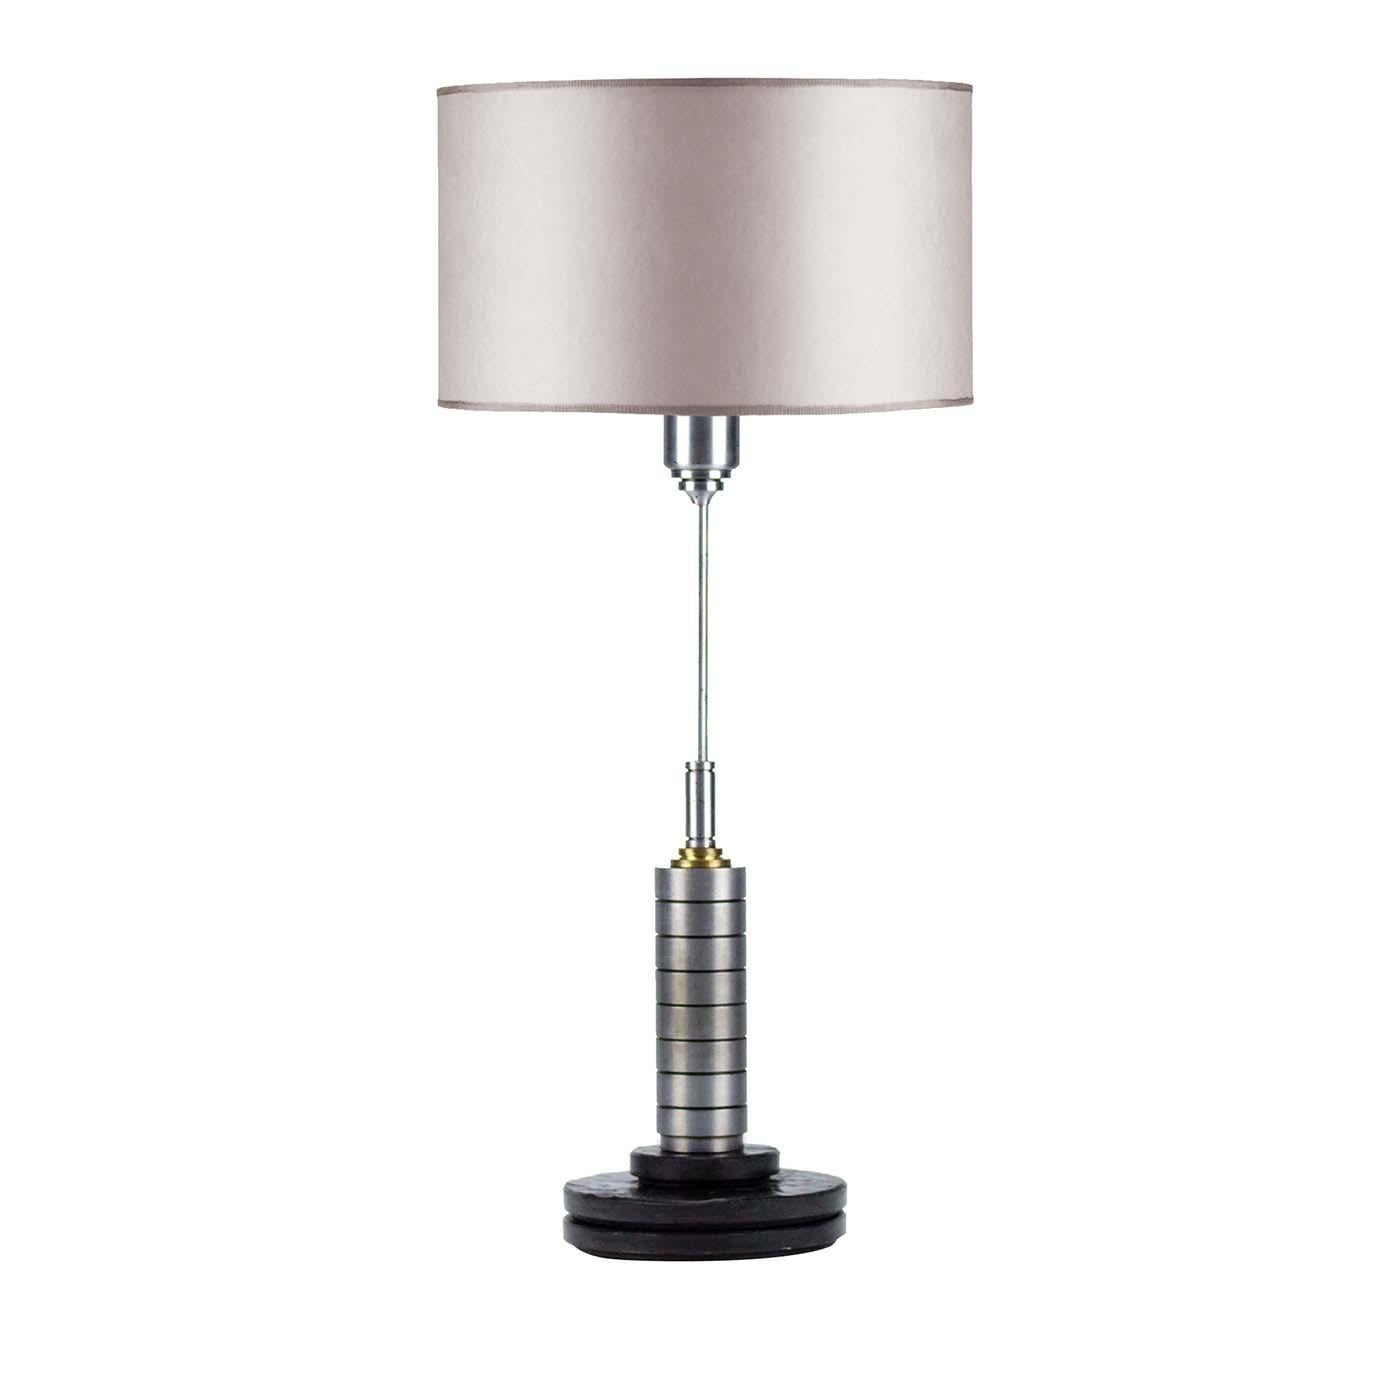 Stunning in every detail, this striking abat-jour showcases just a hint of midcentury allure with its polished steel structure while the light gray silk drum shade and Matrix marble round base infuse glamour and elegance. Marked by a slender